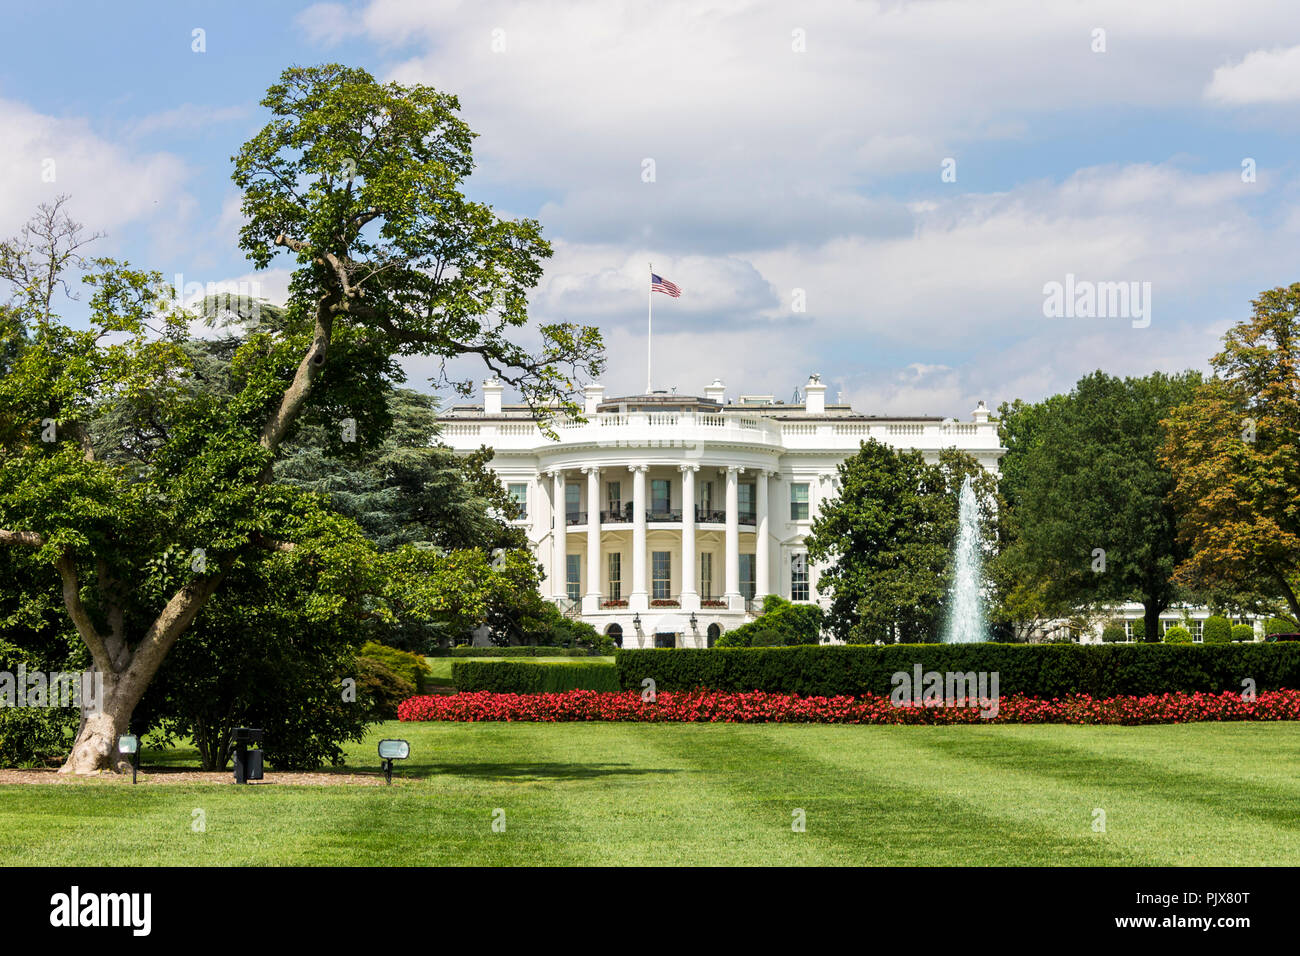 Washington, D.C. The southern facade of the White House, official residence and workplace of the President of the United States, with a semi-circular  Stock Photo